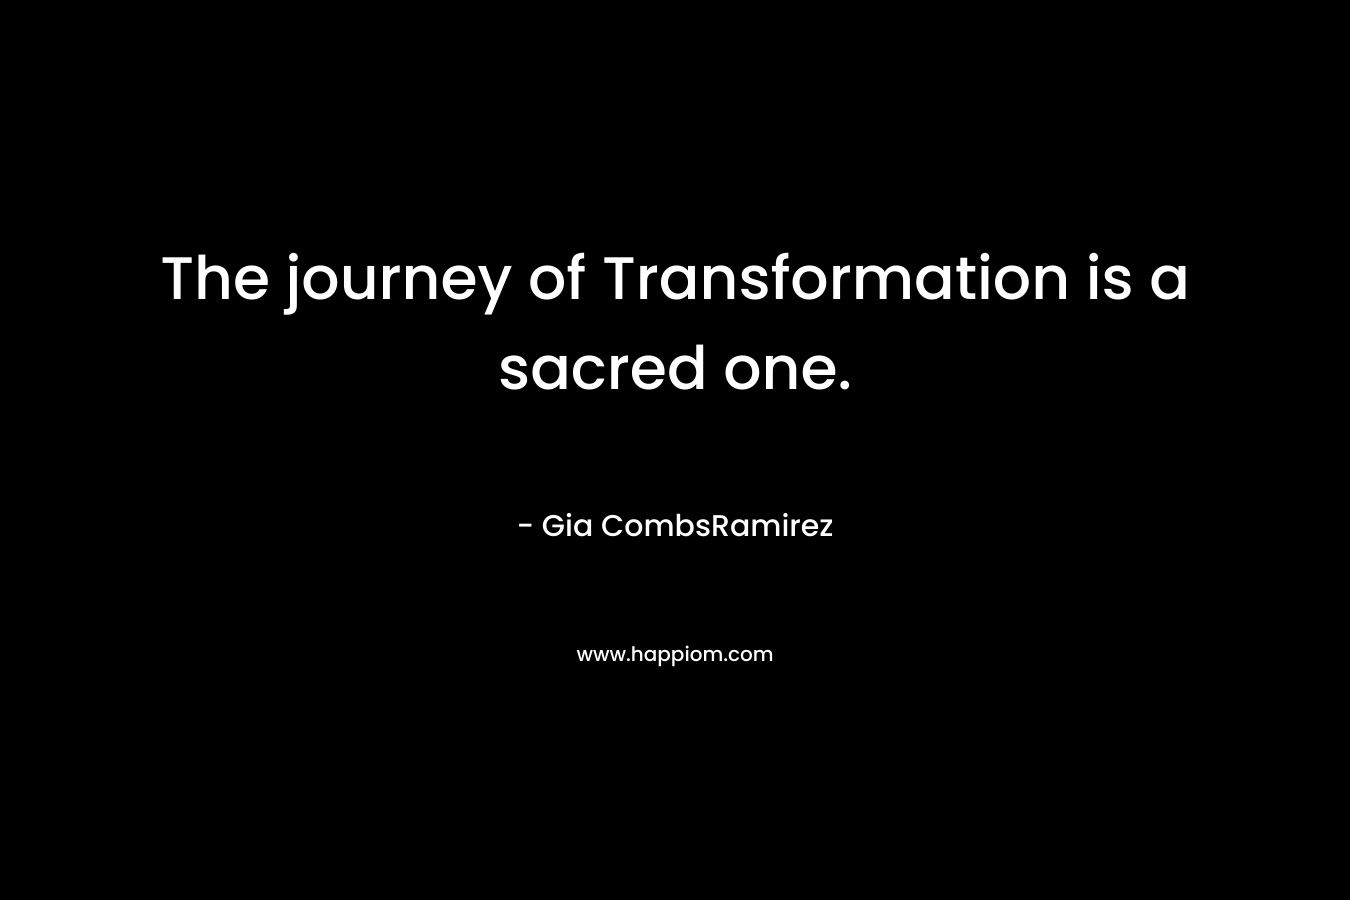 The journey of Transformation is a sacred one. – Gia CombsRamirez